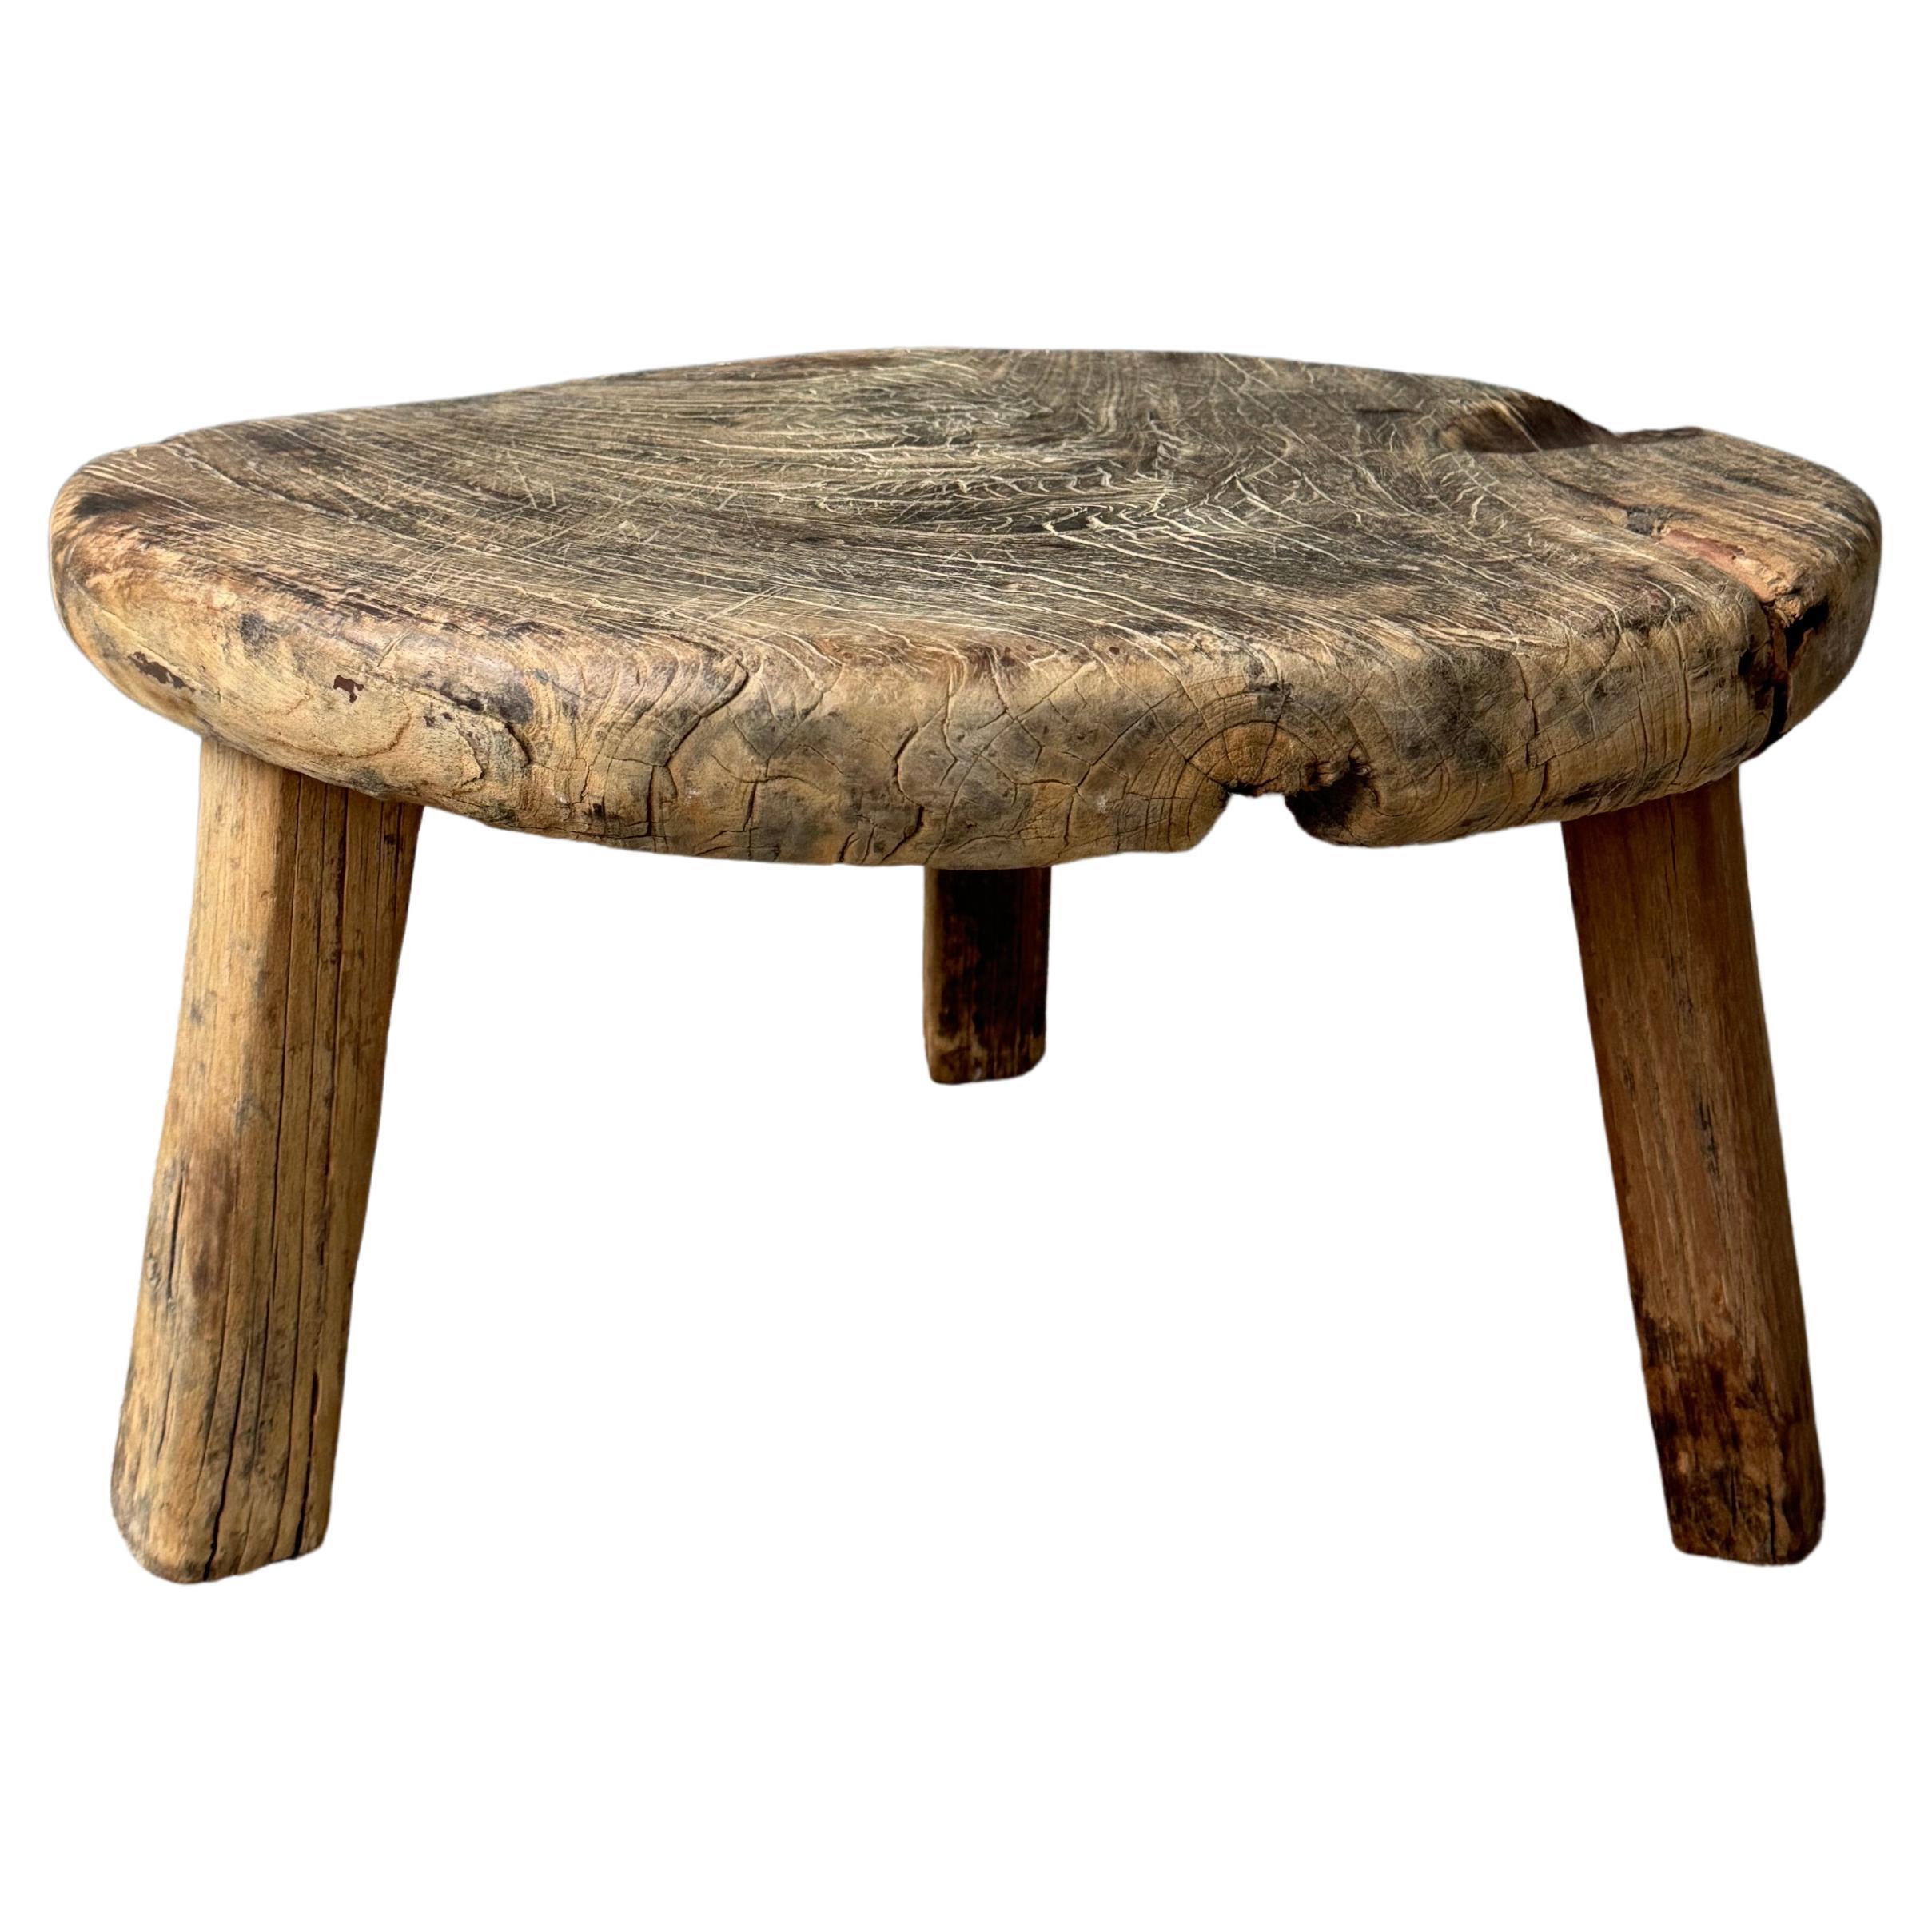 Primitive Hardwood Round Table From Central Yucatan, Late 20th Century 